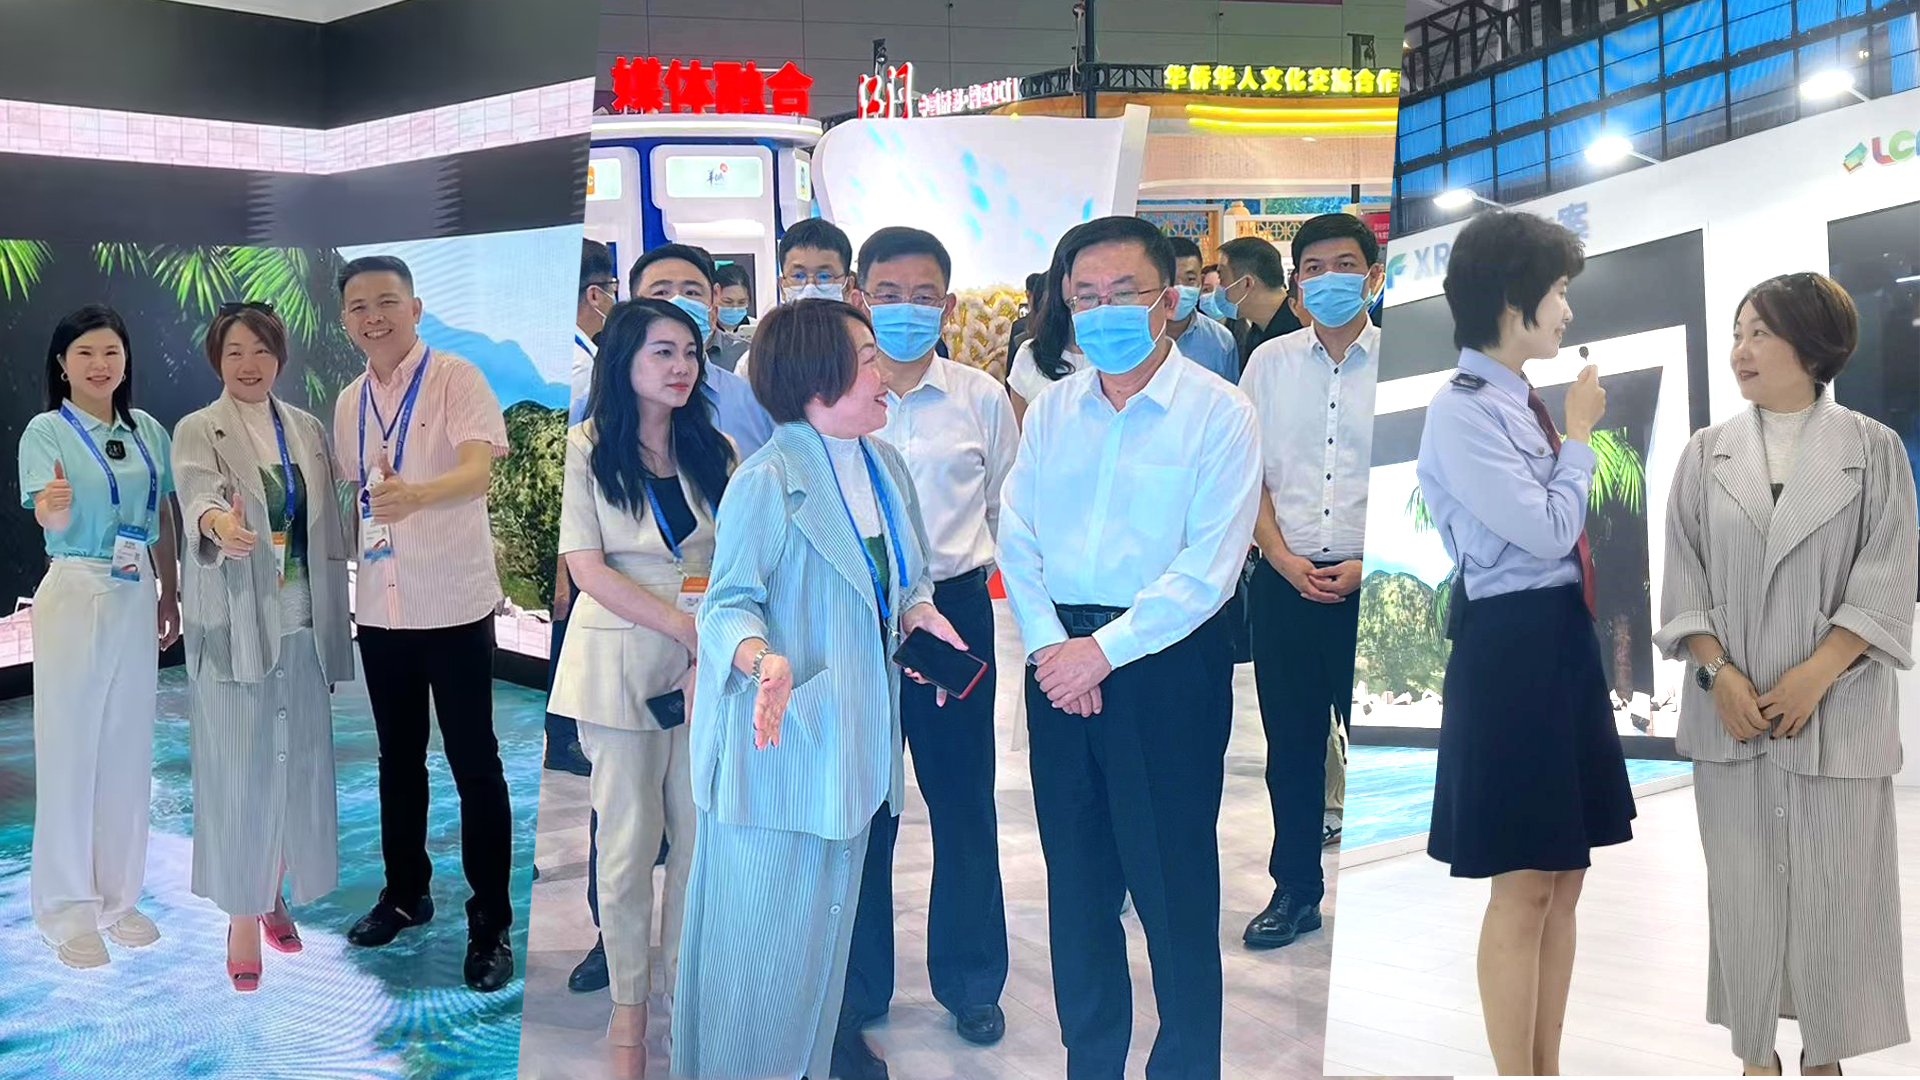 The leaders of Baoan District visited the LCF booth